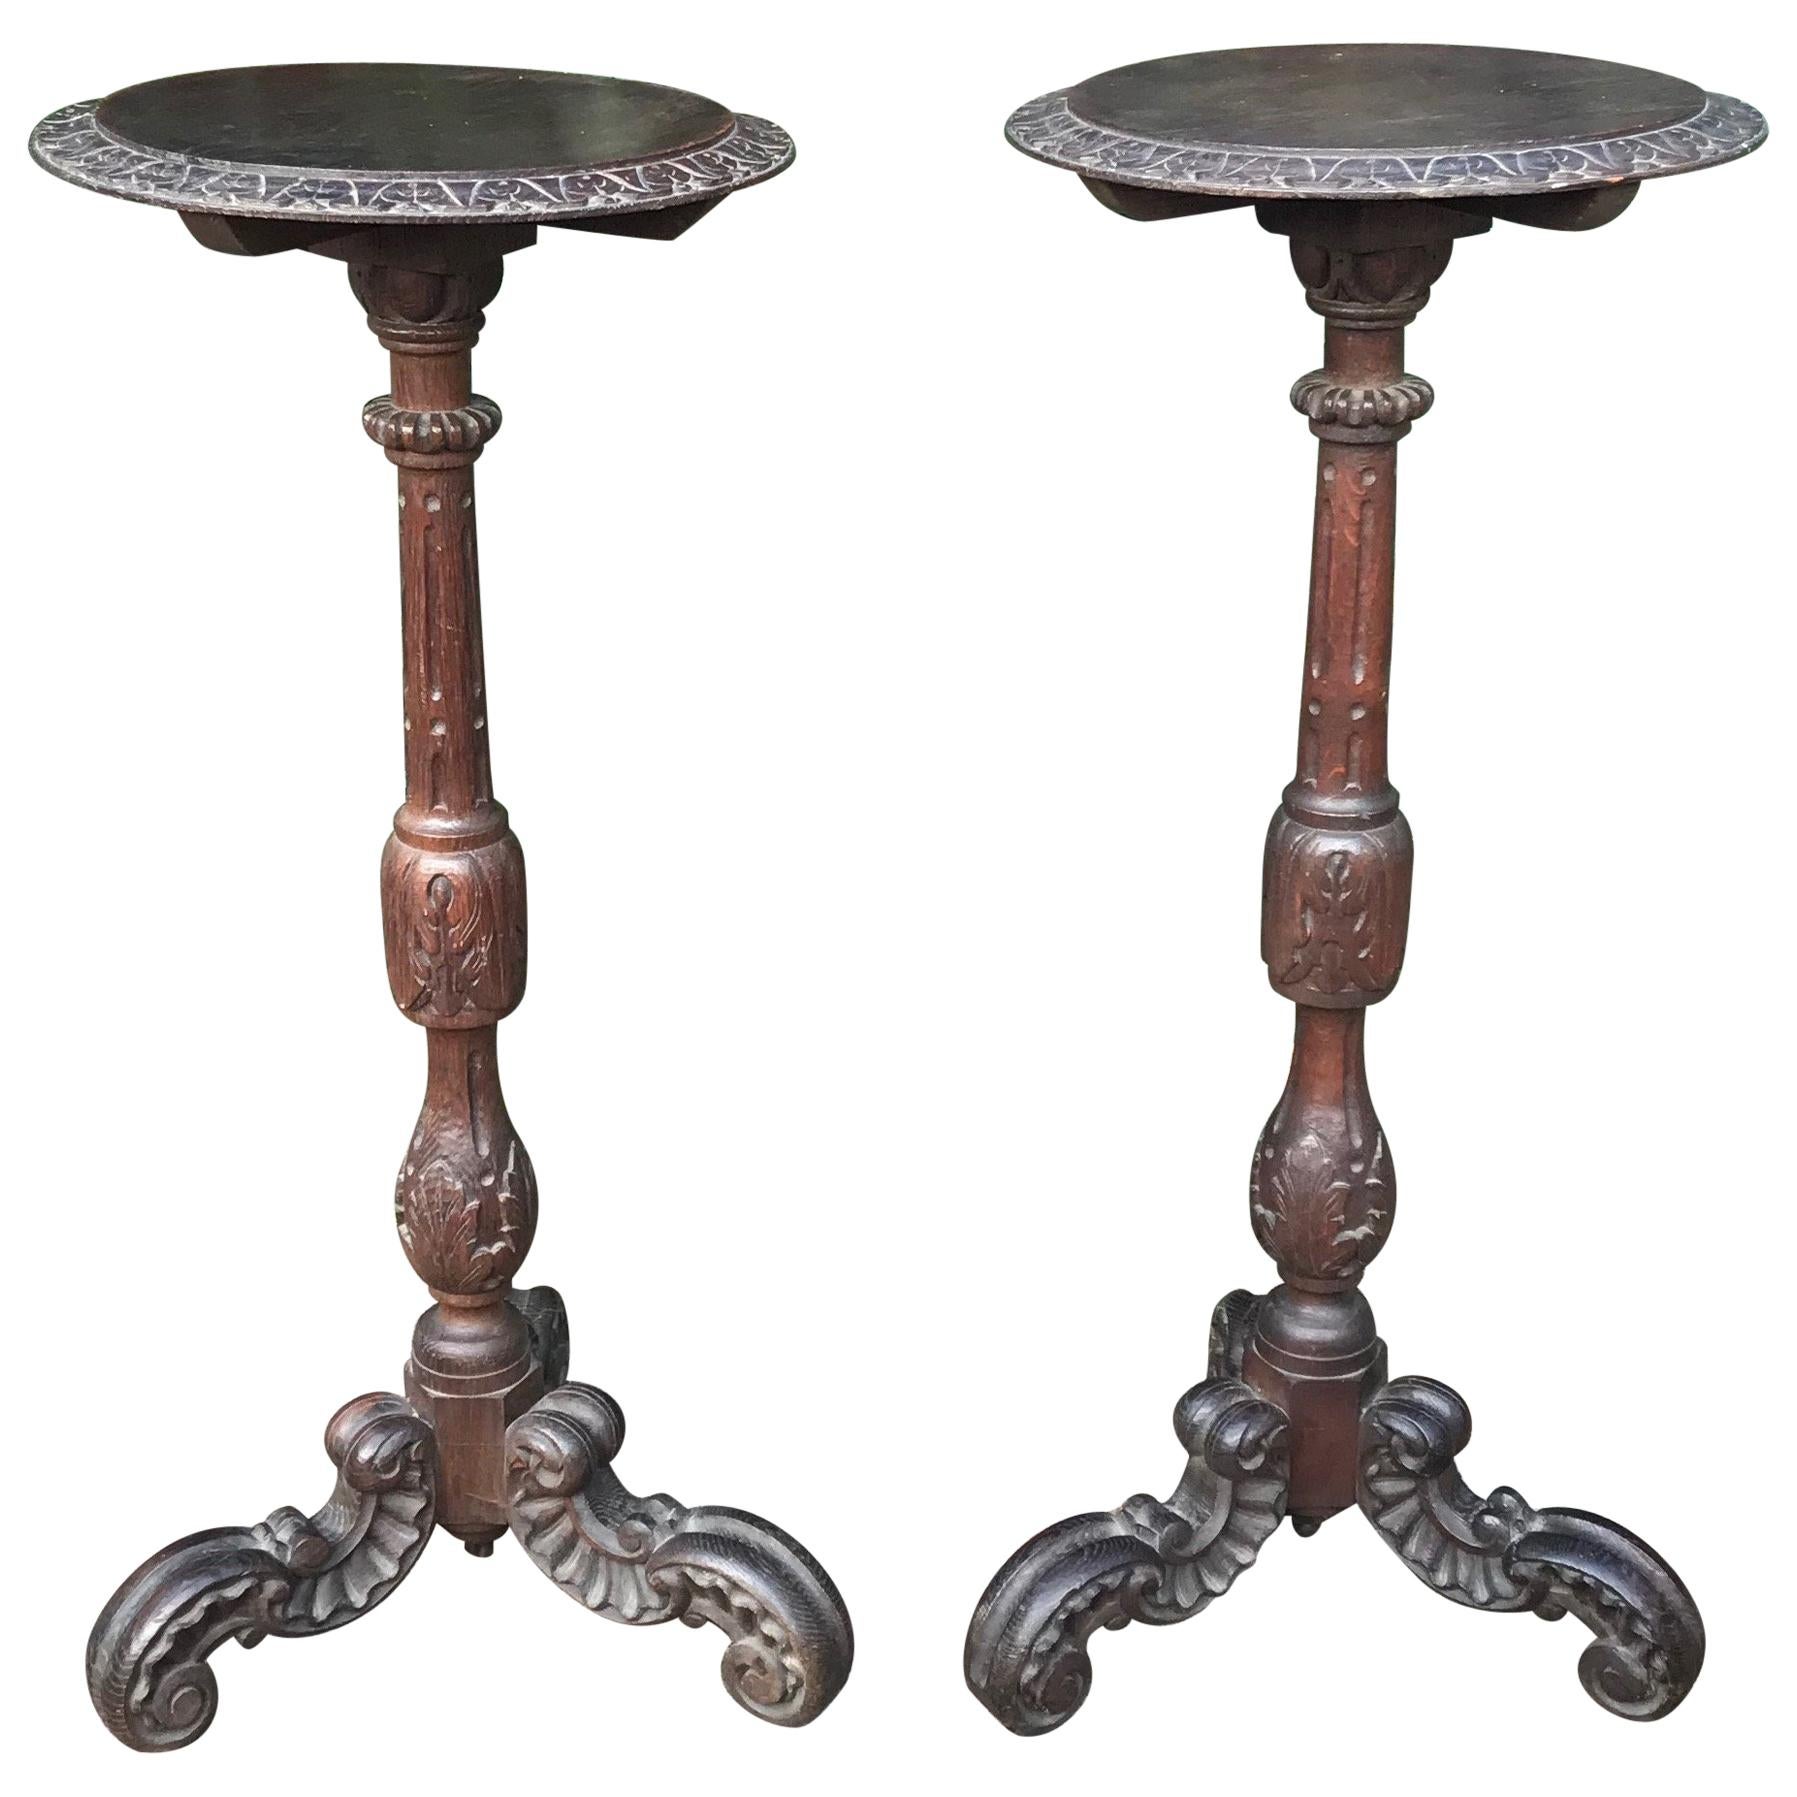 Large & Marvelous Pair of Handcrafted Oak Gueridon Flower Tables, Pedestals